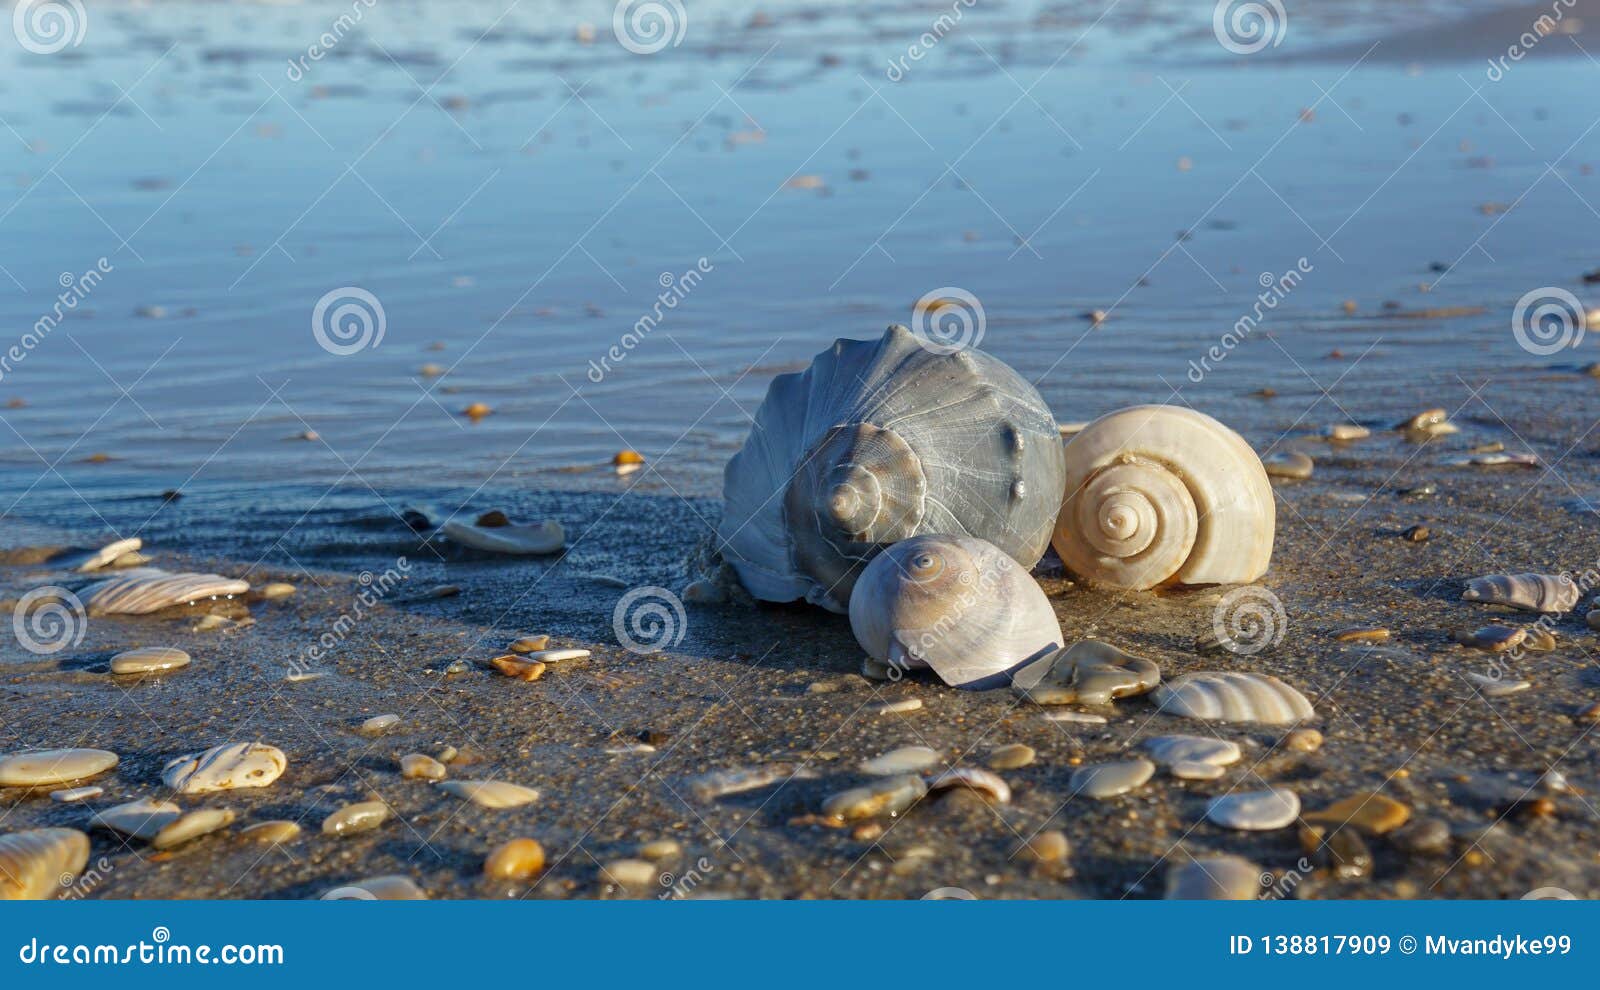 background seashells on beach in the outer banks nc